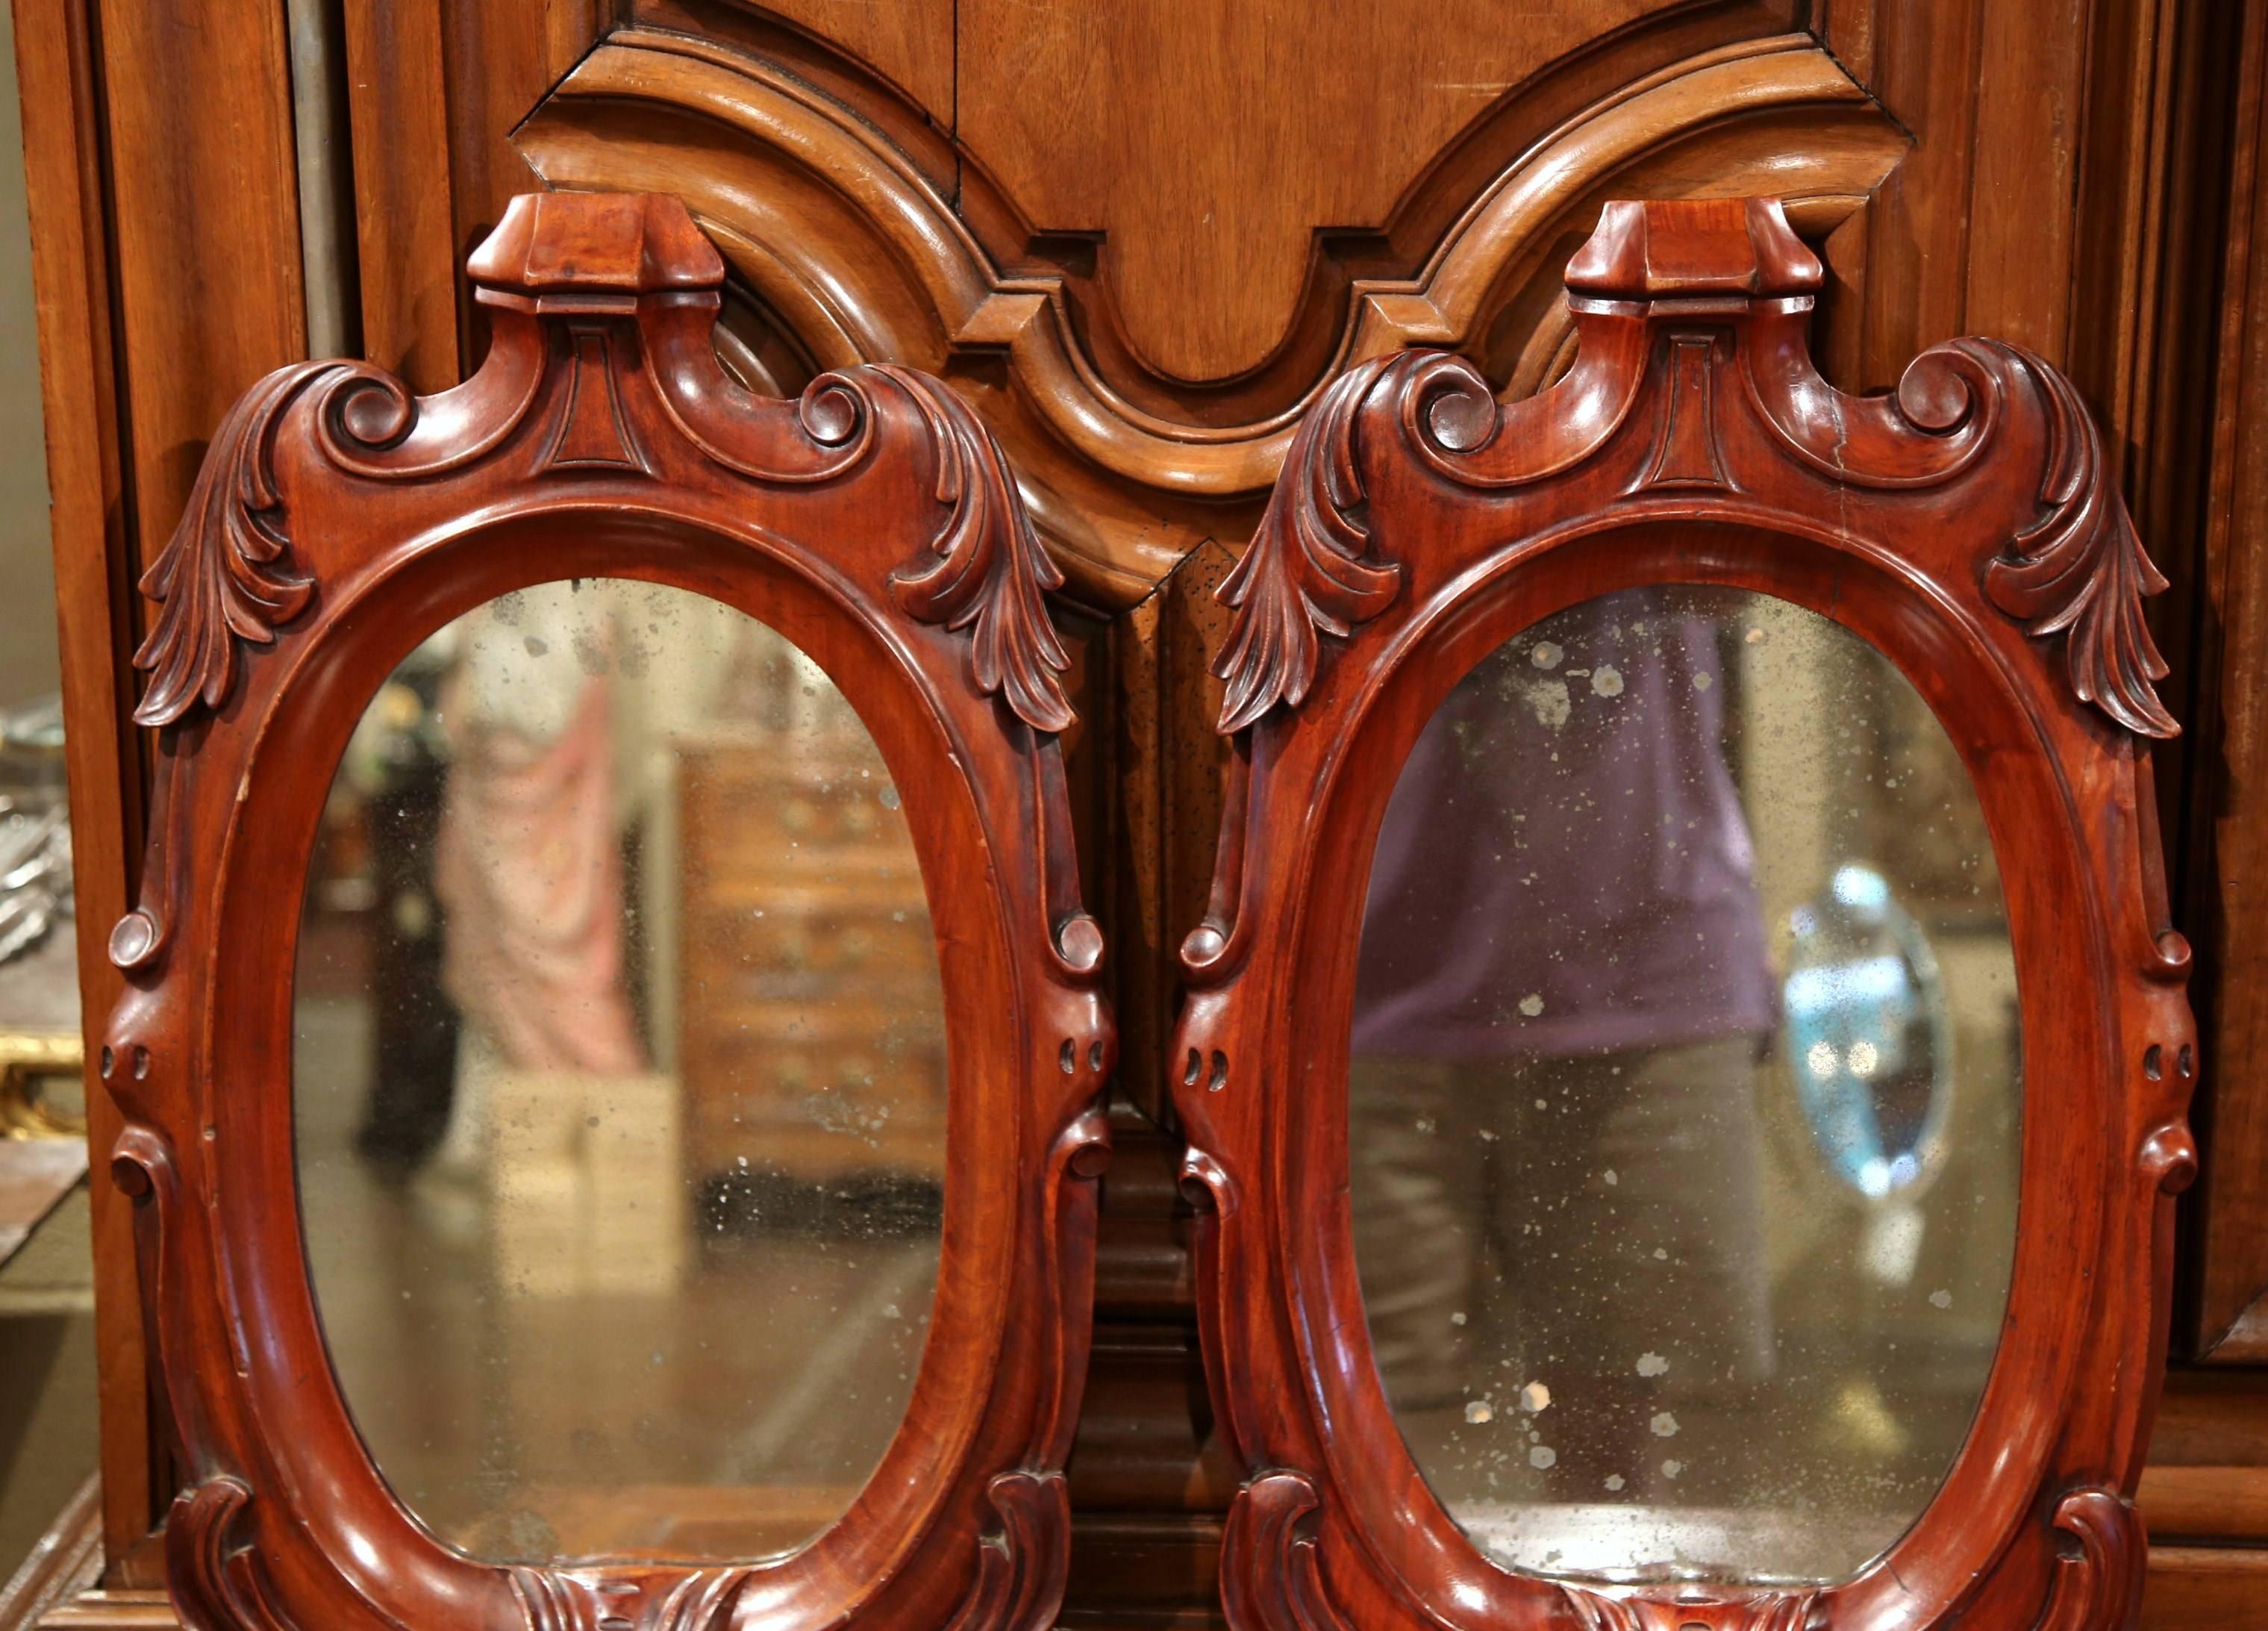 These elegant antique wall hanging mirrors were crafted in France, circa 1890. Each fruit wood mirror features hand carved foliage decor in high relief and the original oval mercury glass. The mirrors are in excellent condition, and the ornate